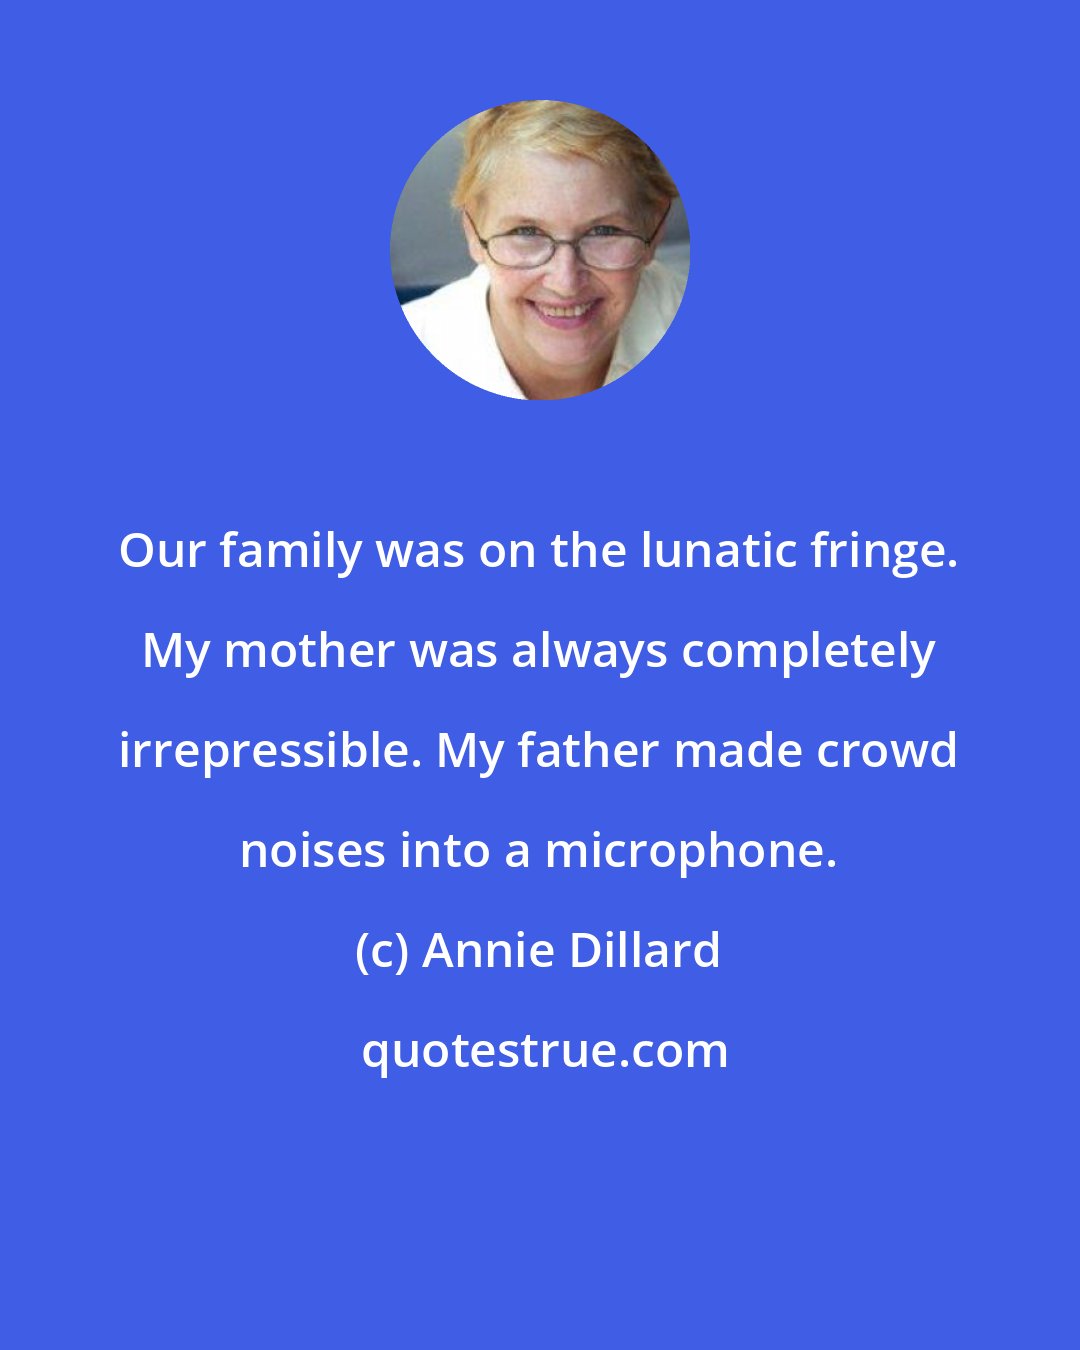 Annie Dillard: Our family was on the lunatic fringe. My mother was always completely irrepressible. My father made crowd noises into a microphone.